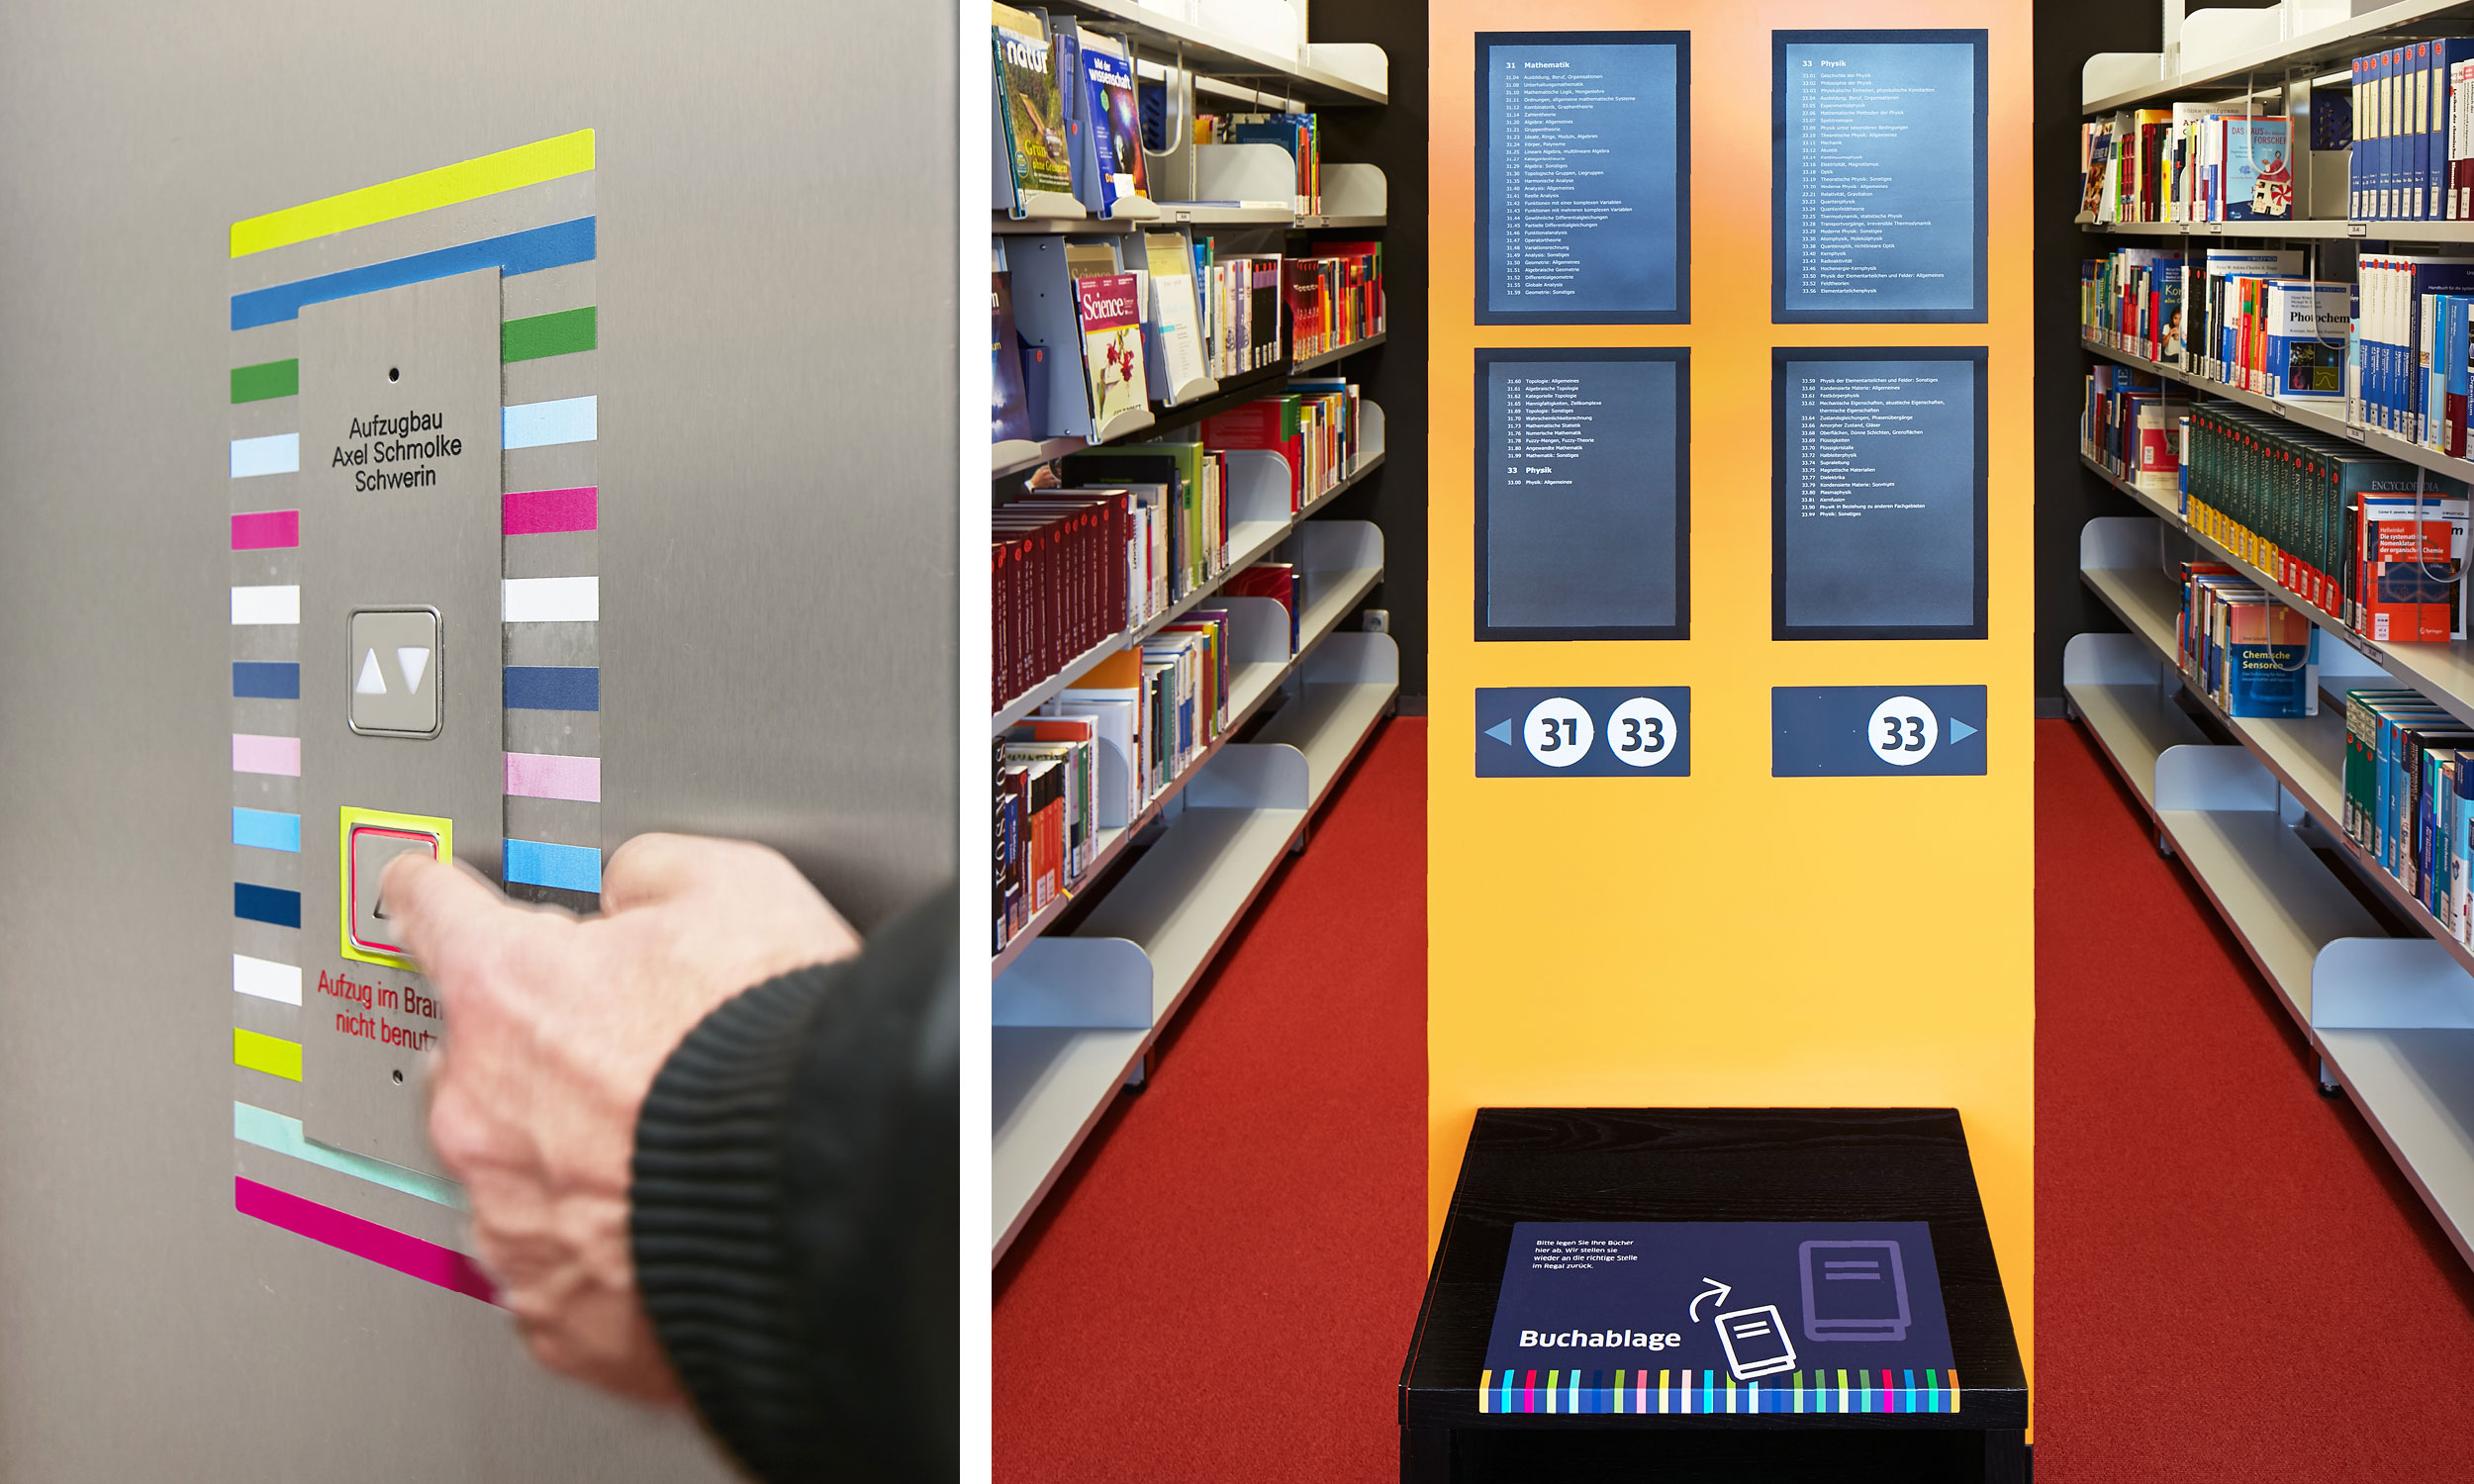 Left photo: Photo showing a view of a coloured lift sign Right photo: Photo showing the front of a shelf of the open access library with magnetic signs for stock indication and a book deposit table